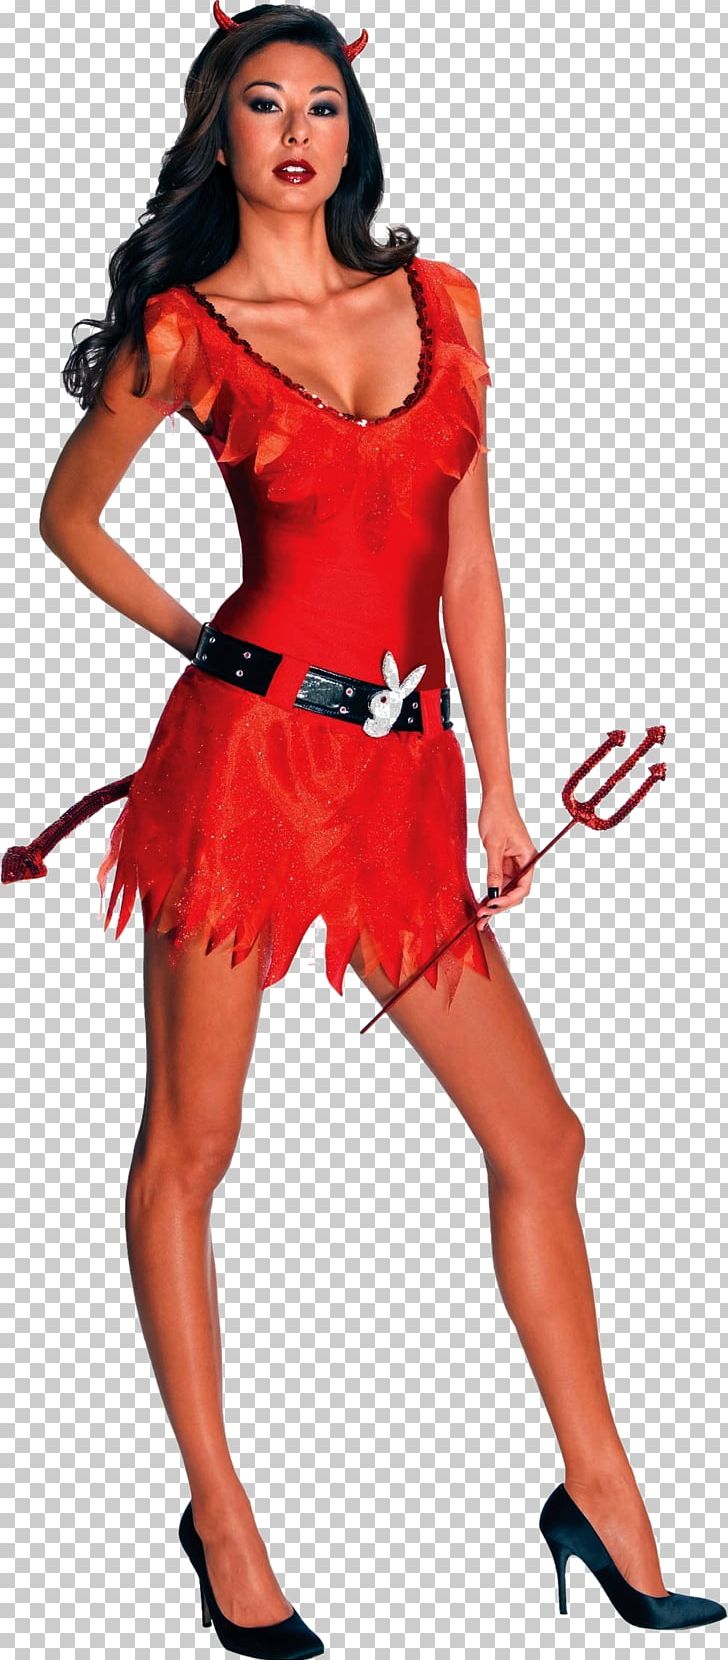 Costume Party Halloween Costume Playboy Bunny Clothing PNG, Clipart, Adult, Clothing, Clothing Accessories, Costume, Costume Design Free PNG Download